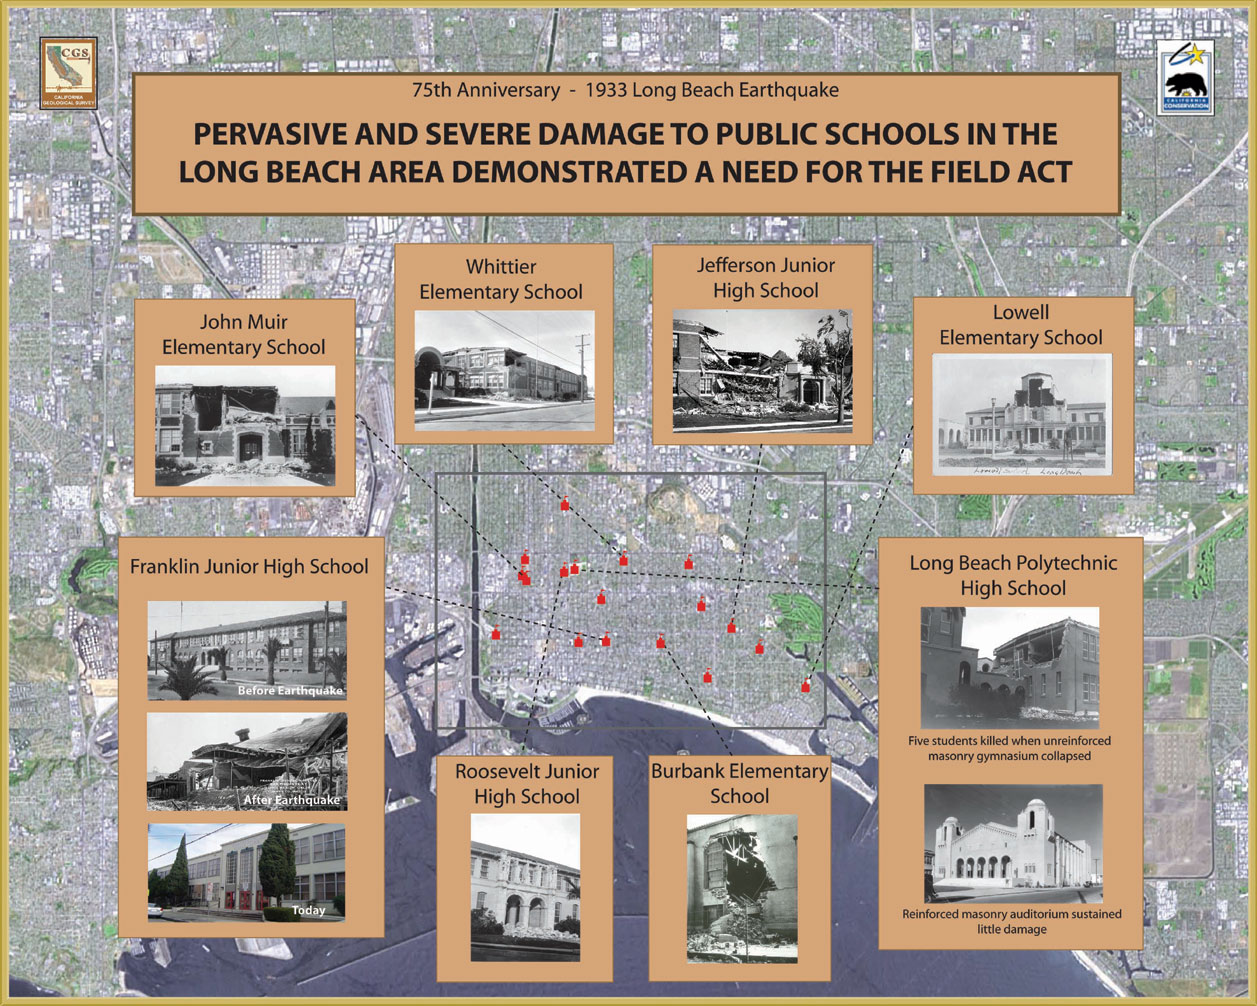 Eight of the schools destroyed by the 1933 Long Beach earthquake.